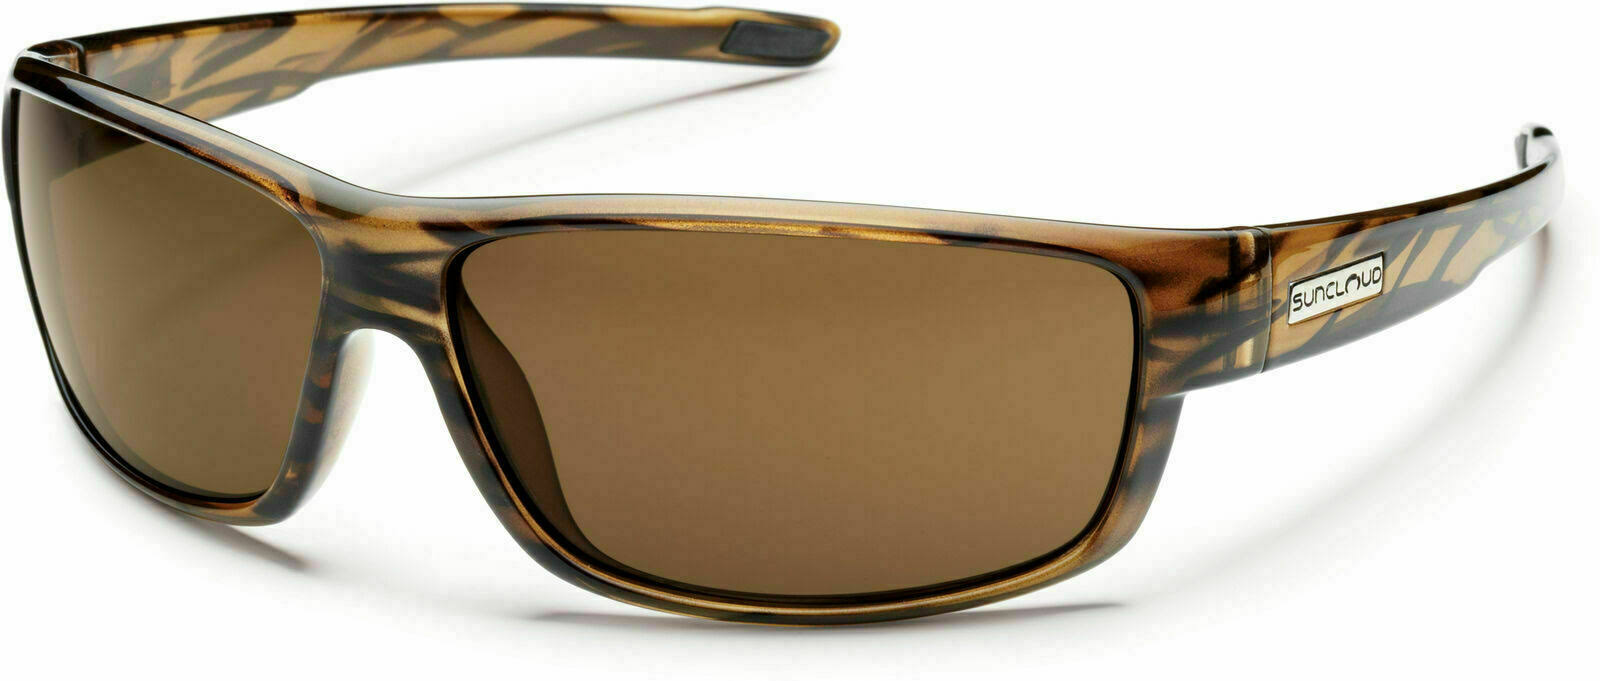 Suncloud Voucher Polarized Sunglasses - Brown Stripe Frame and Brown Lens